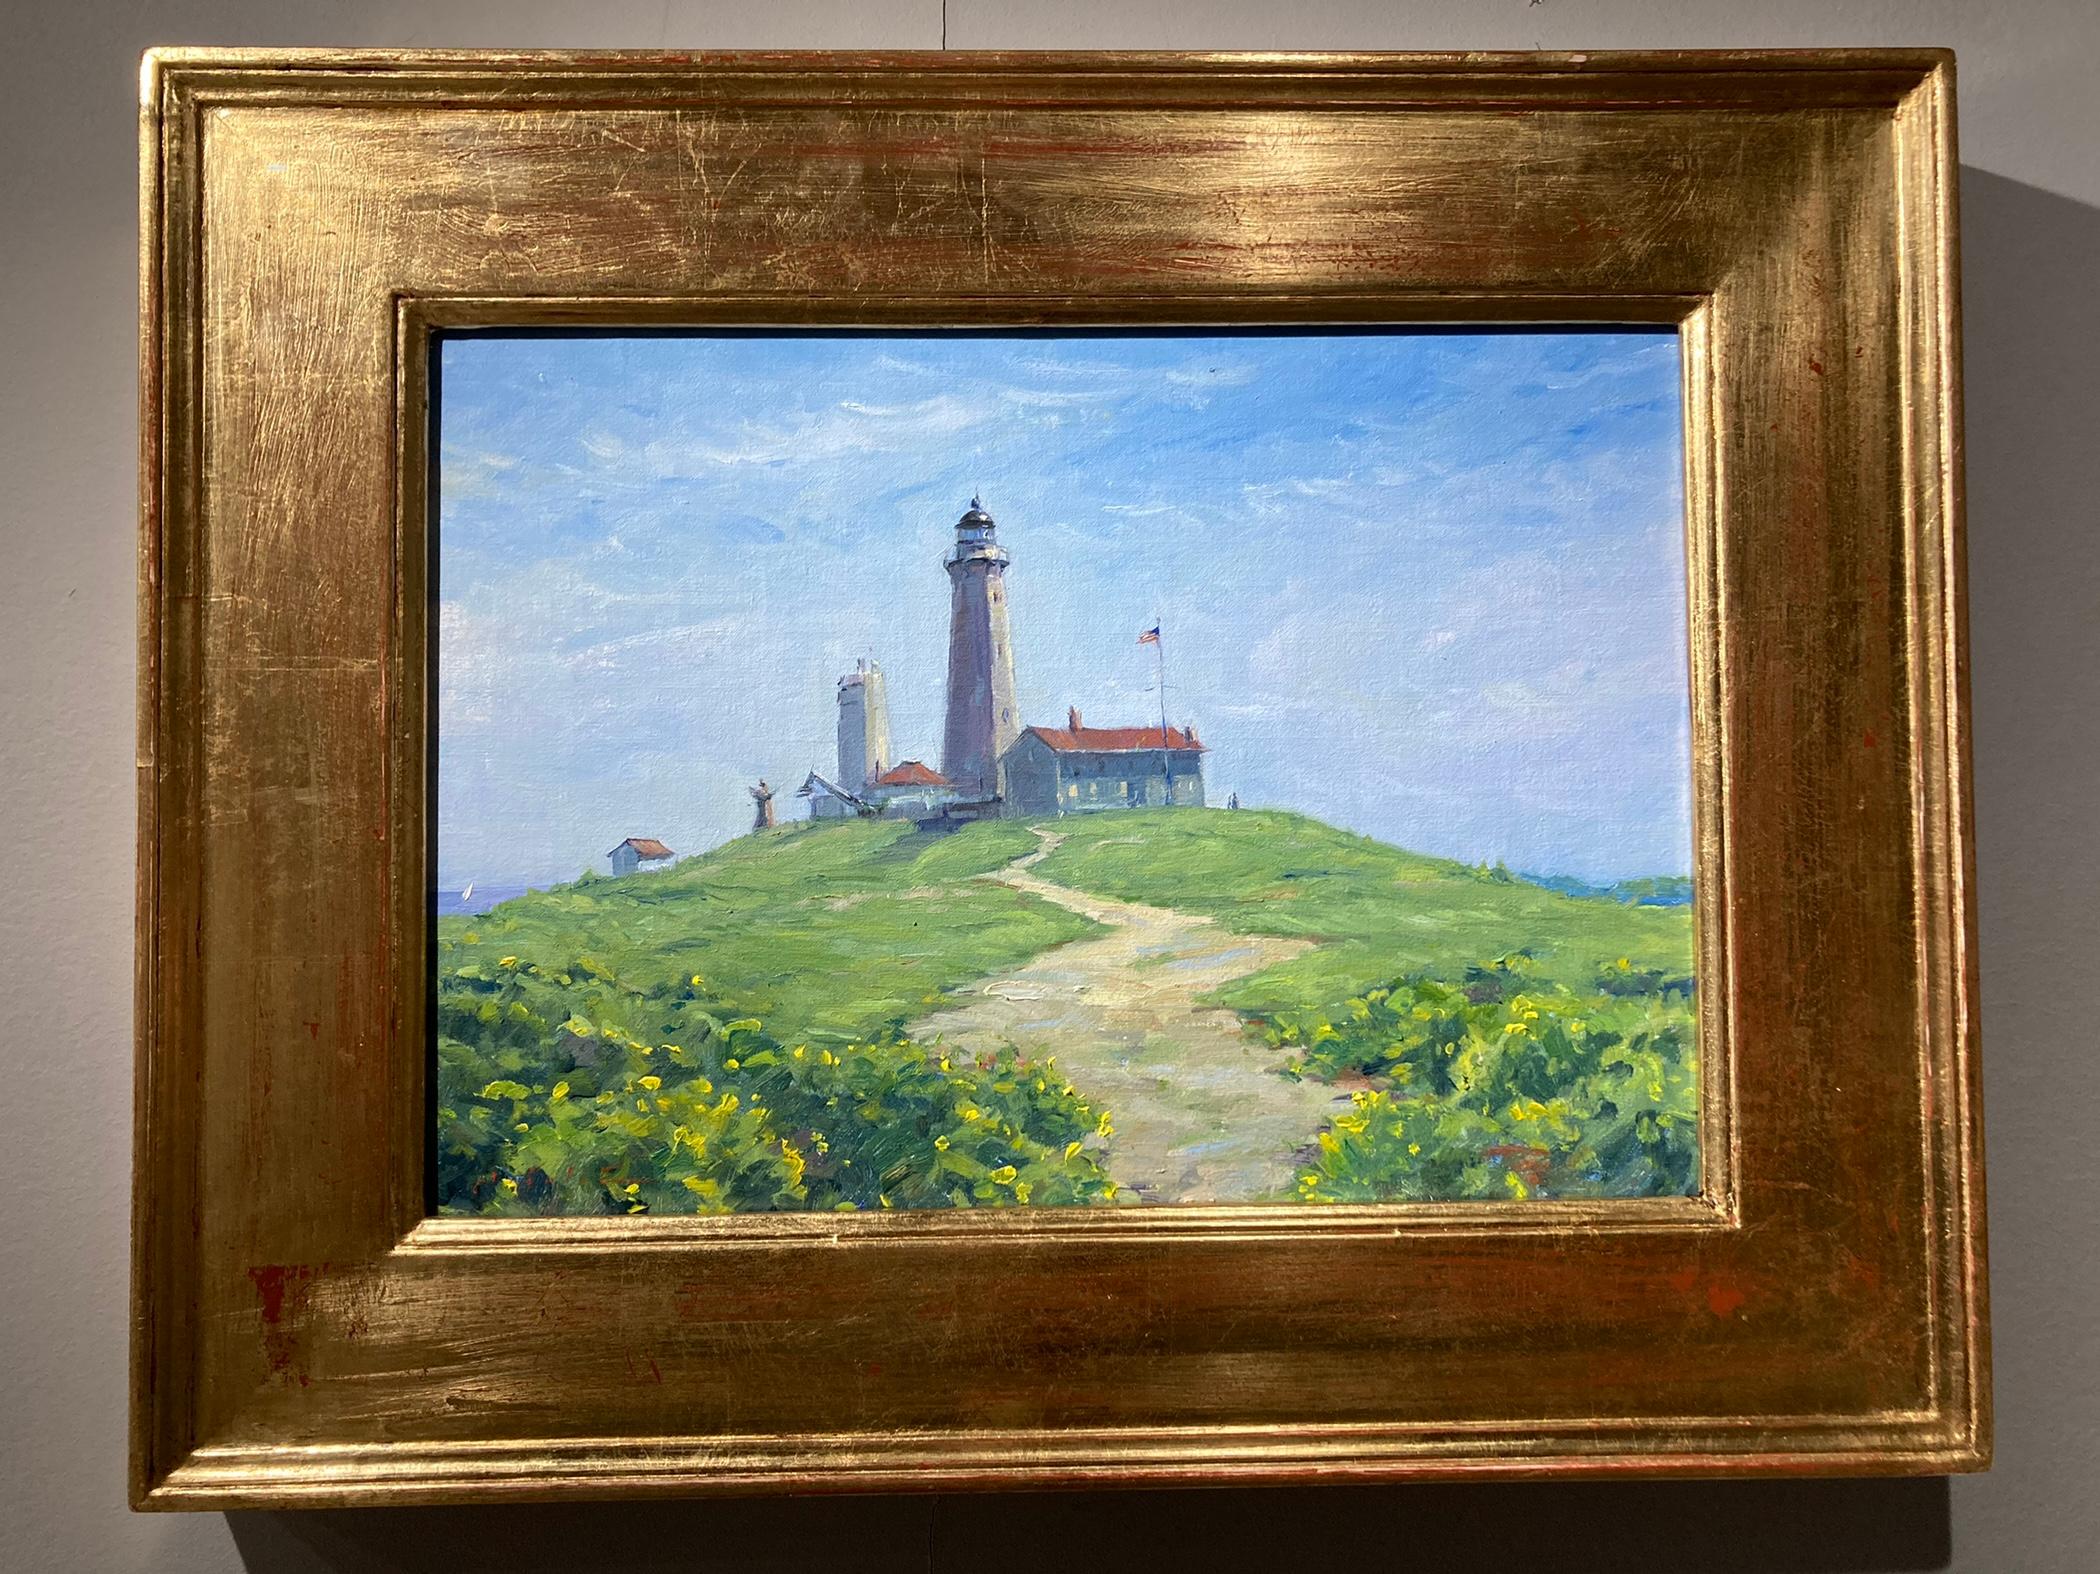 Montauk Point Lighthouse - Painting by Tina Orsolic Dalessio